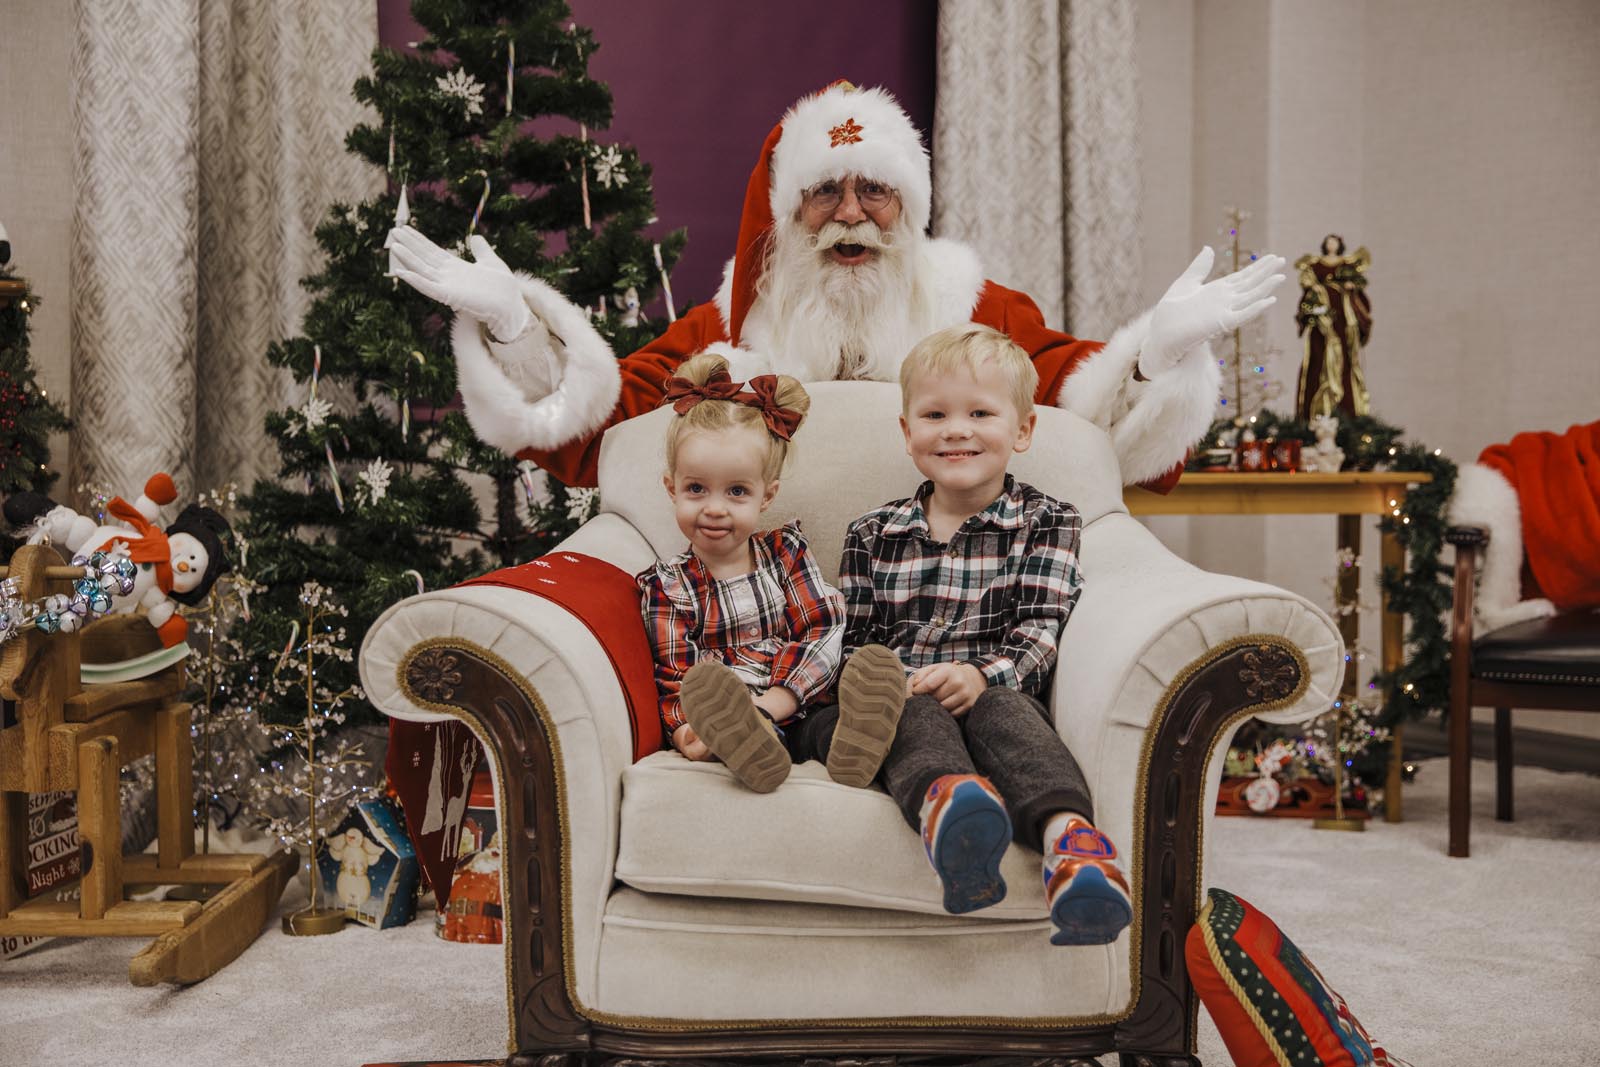 boise santa pics santa standing behind chair with brother and sister sitting in it smiling